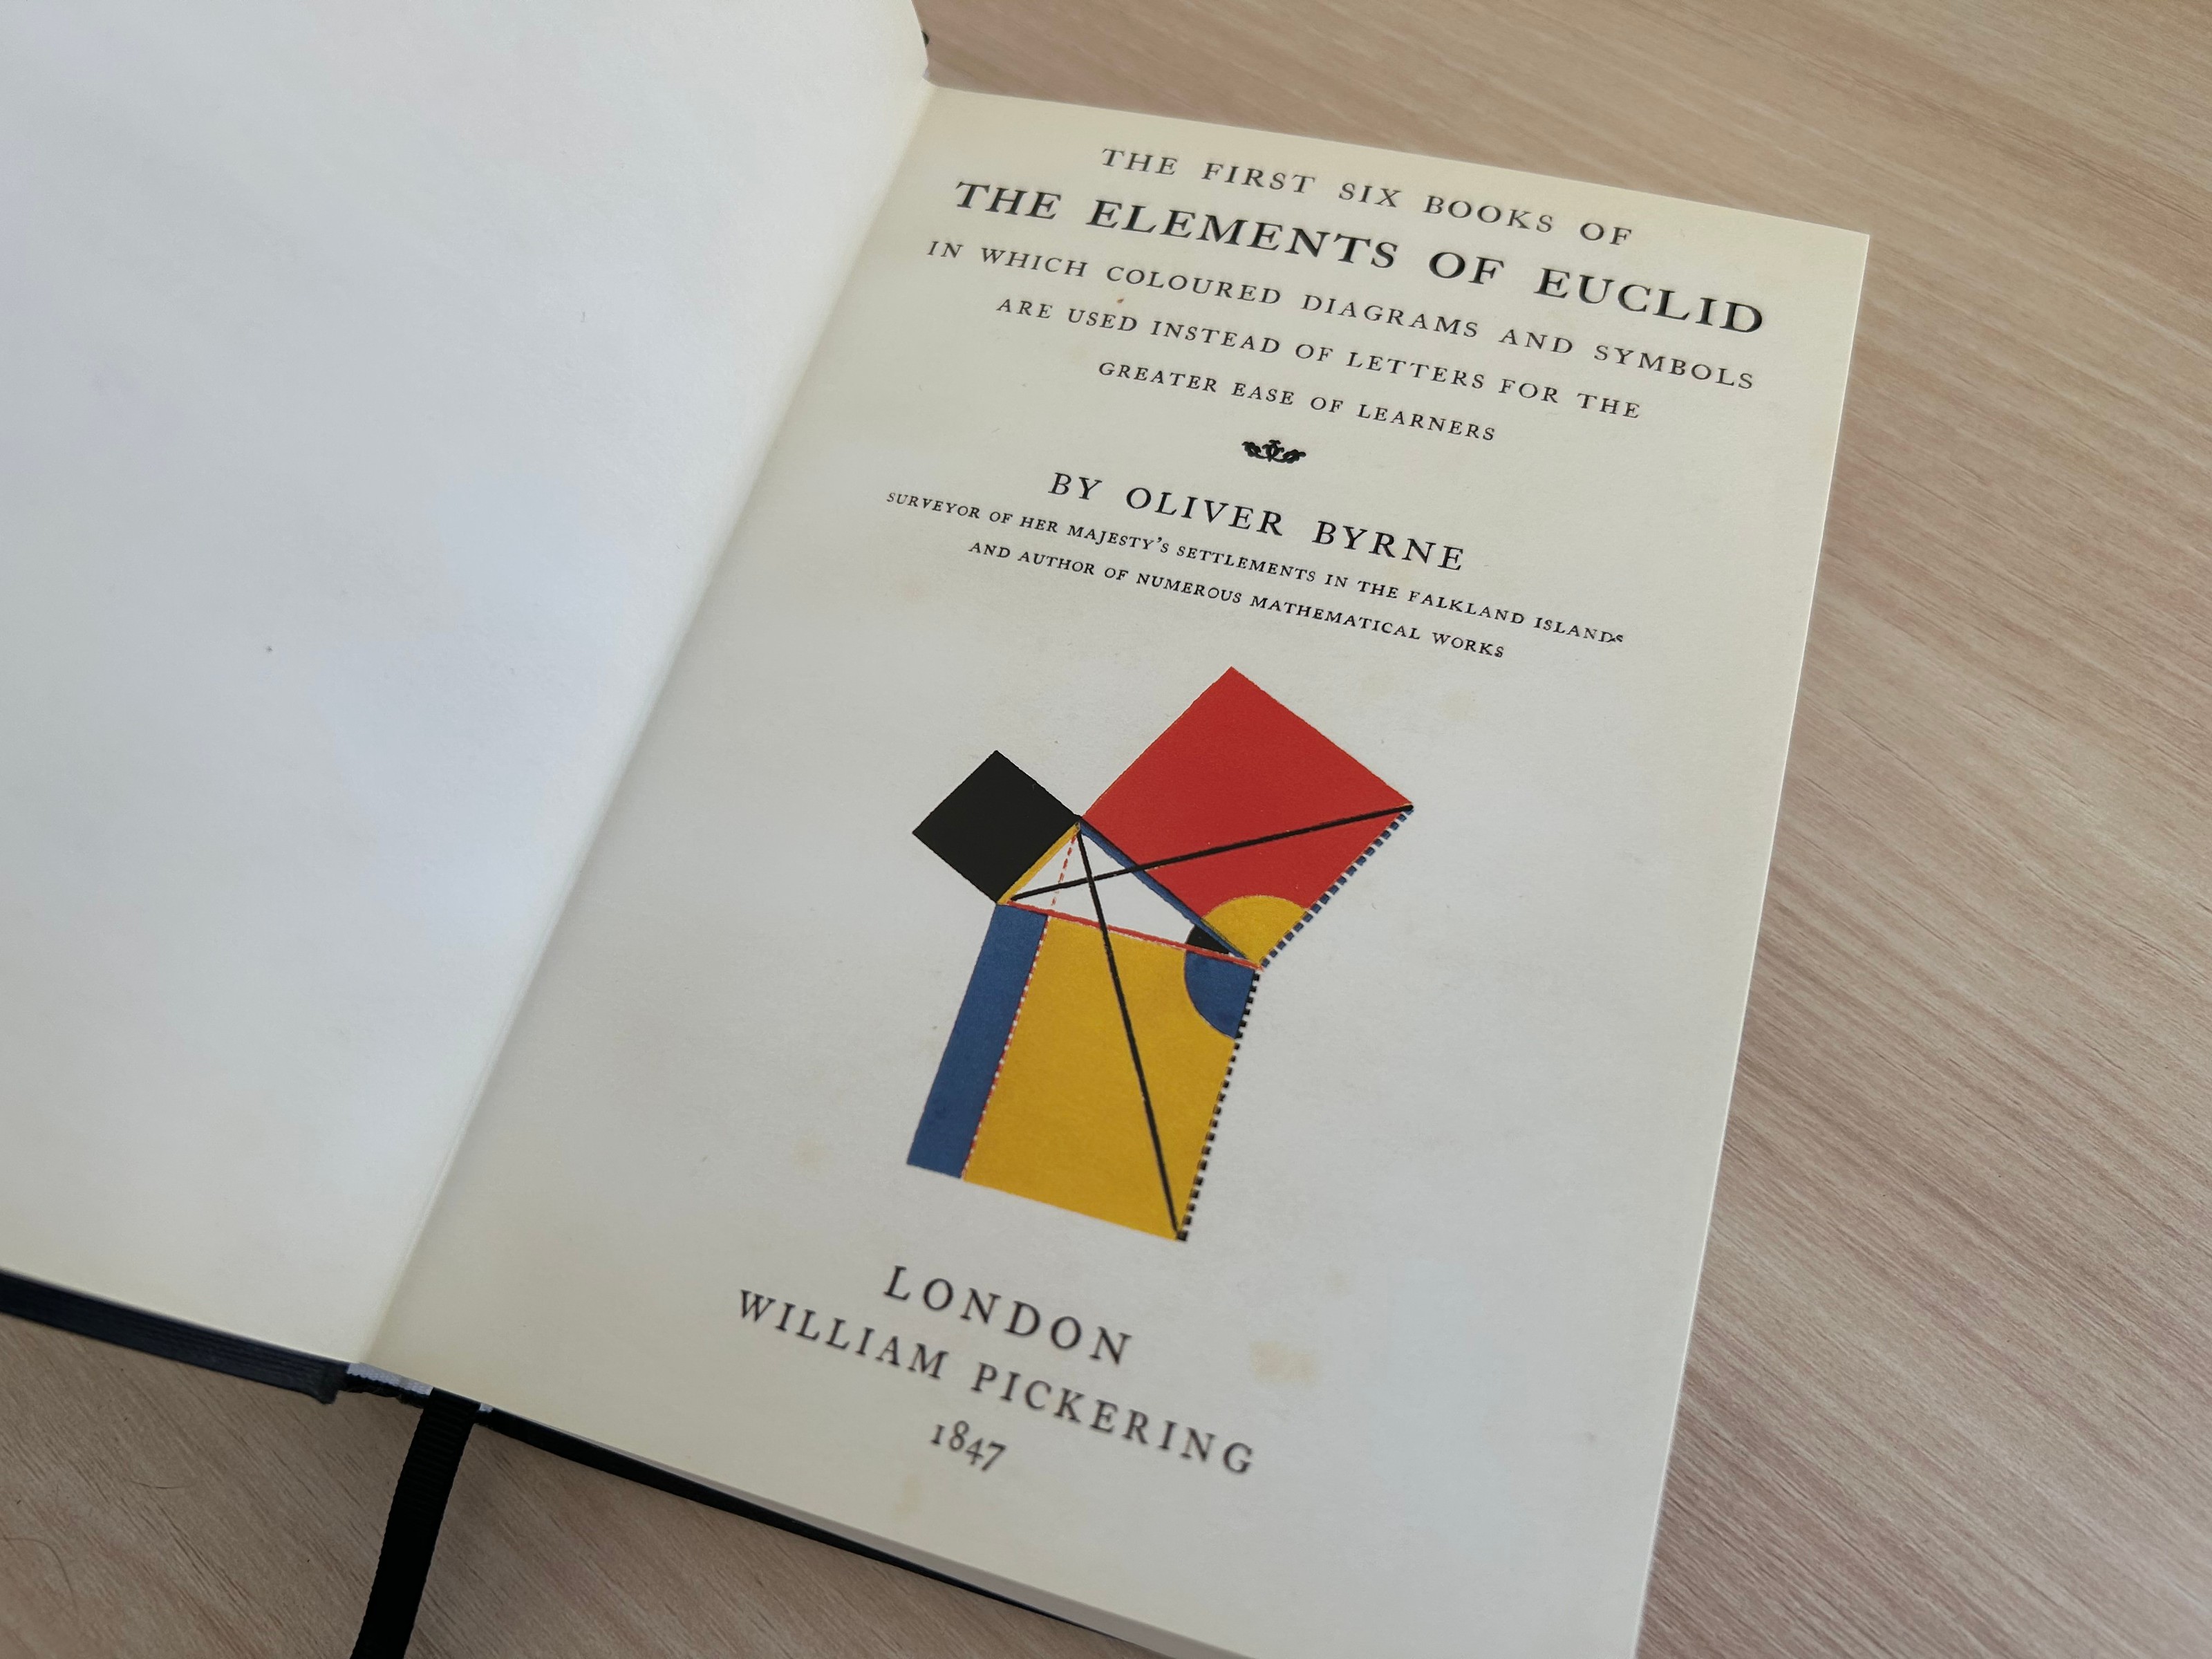 The cover page of my copy of Byrne’s Elements of Euclid.